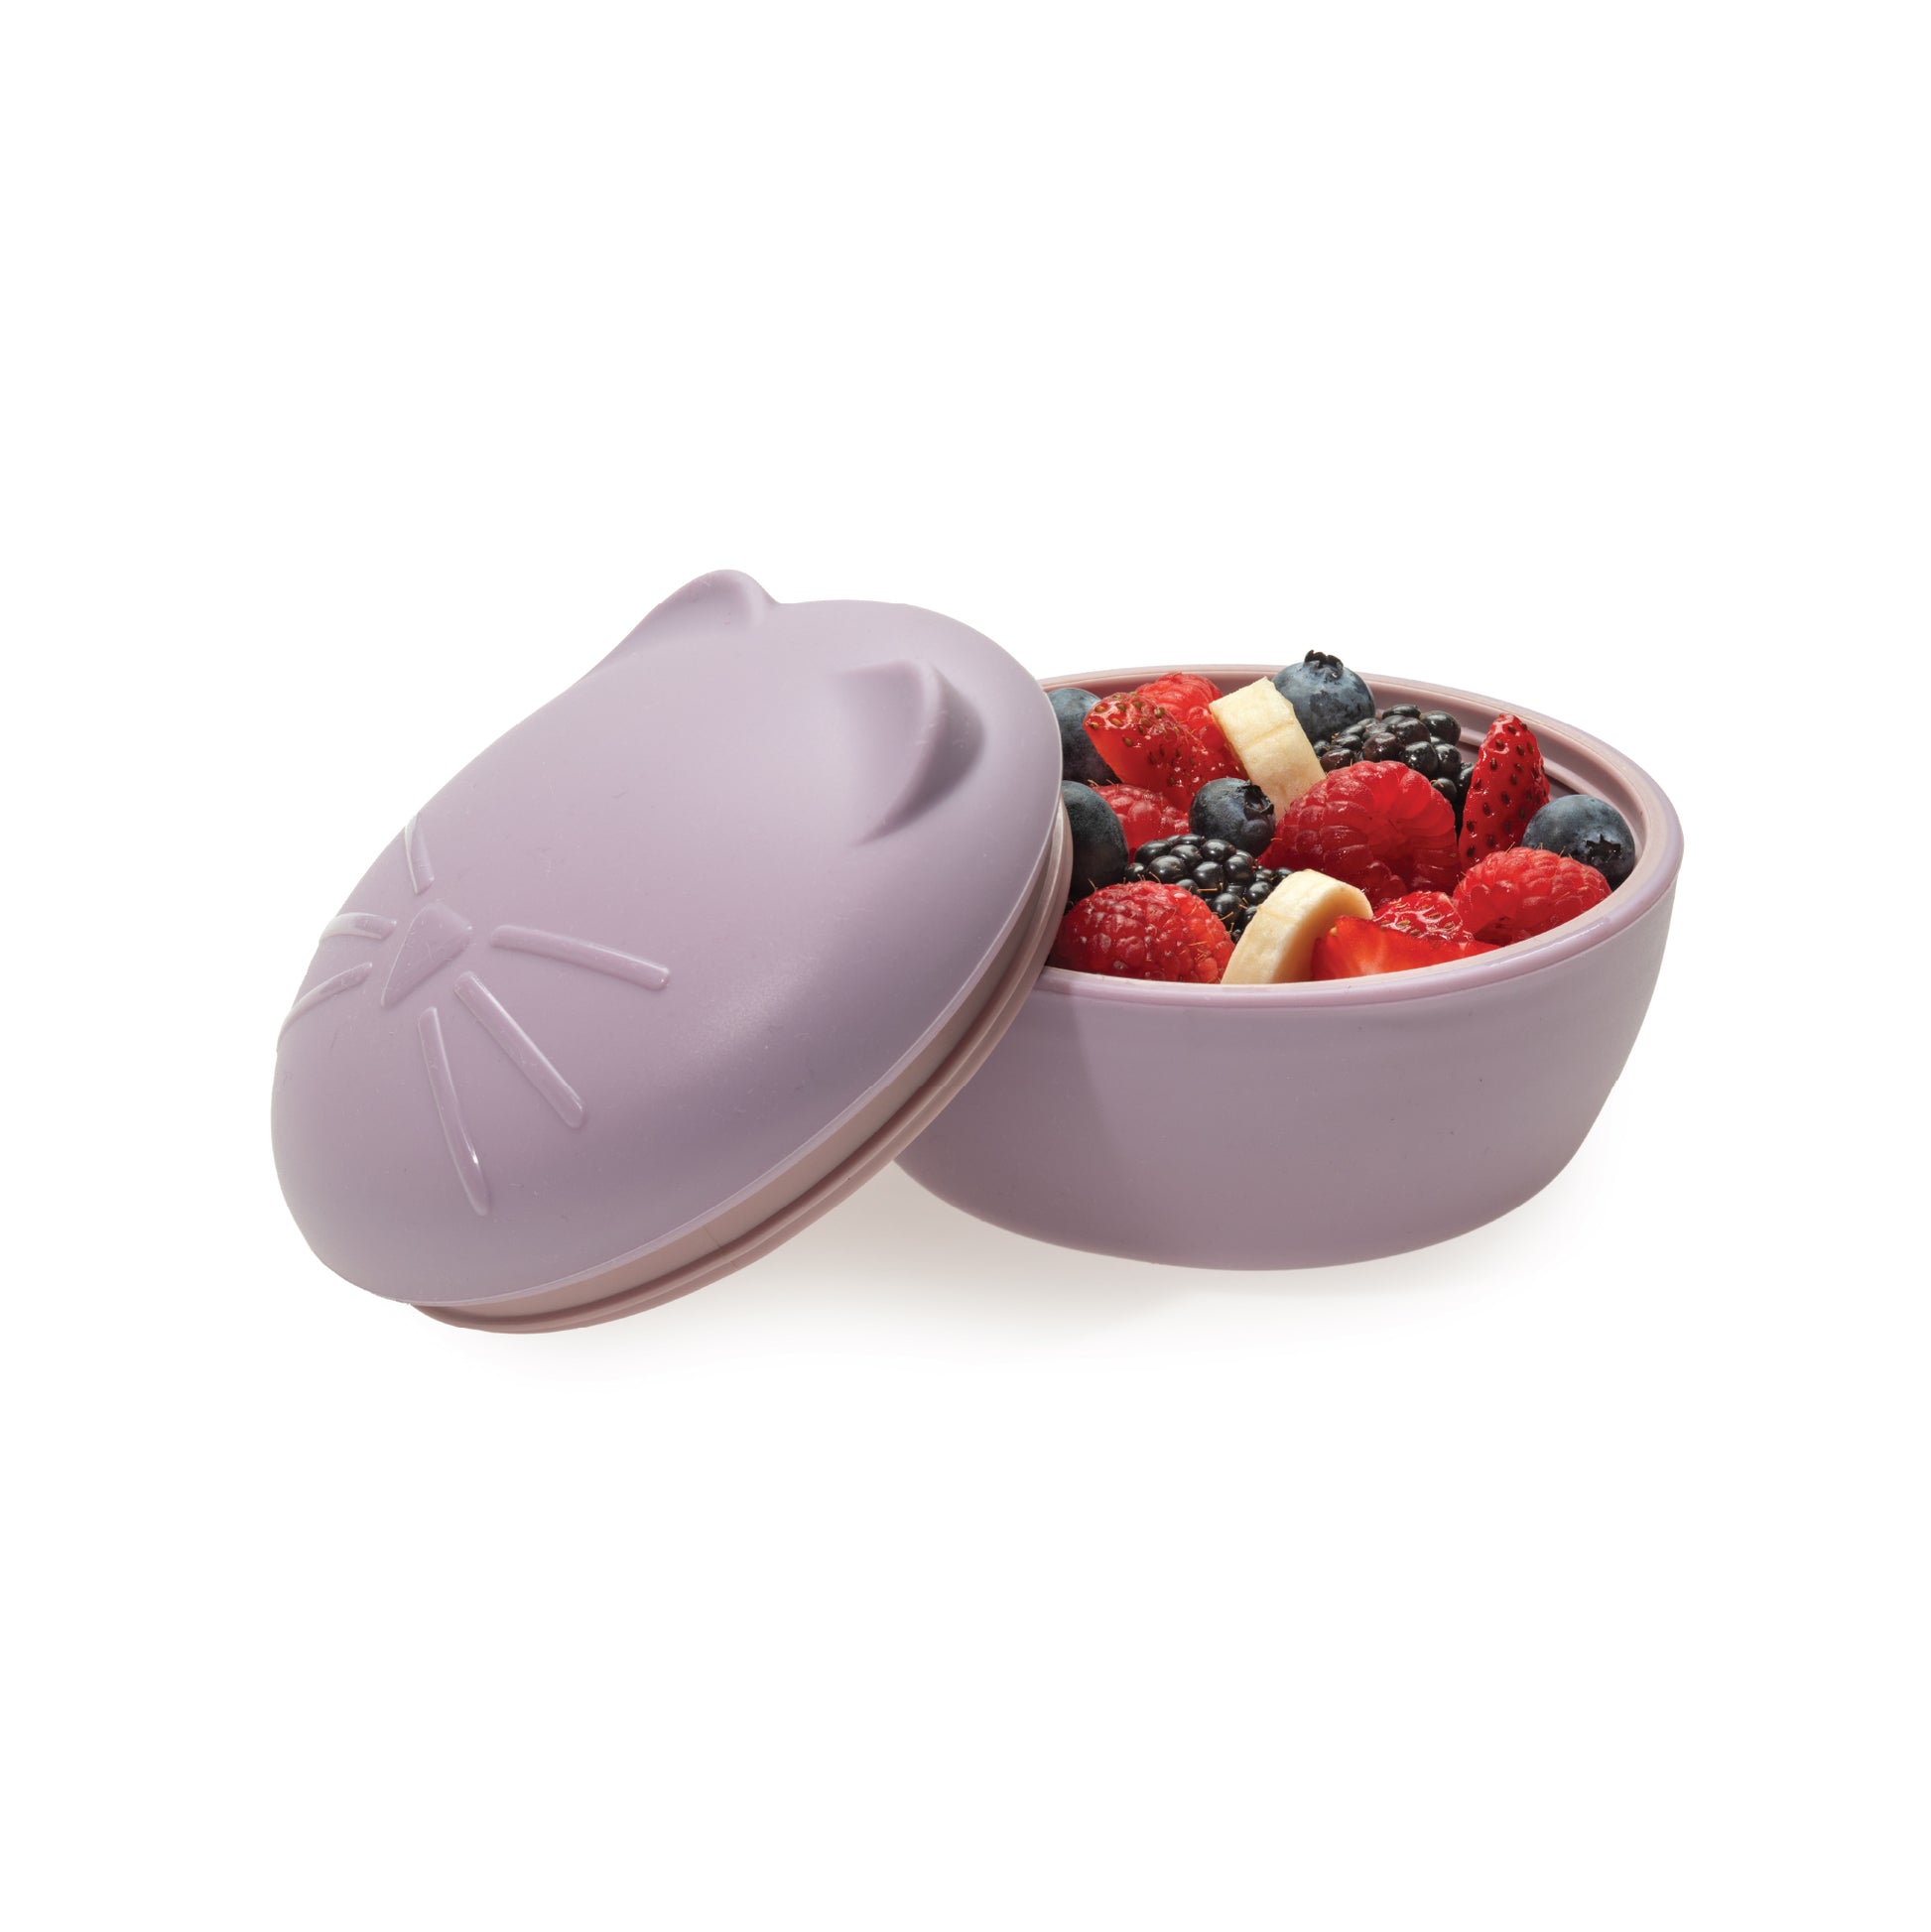 Melii Silicone Purple Cat Bowl with Lid 350 ml - Airtight, and Leakproof Food Storage for Babies, Toddlers, Kids - BPA Free, Microwave Safe, Perfect for On-the-Go Meals Snacks